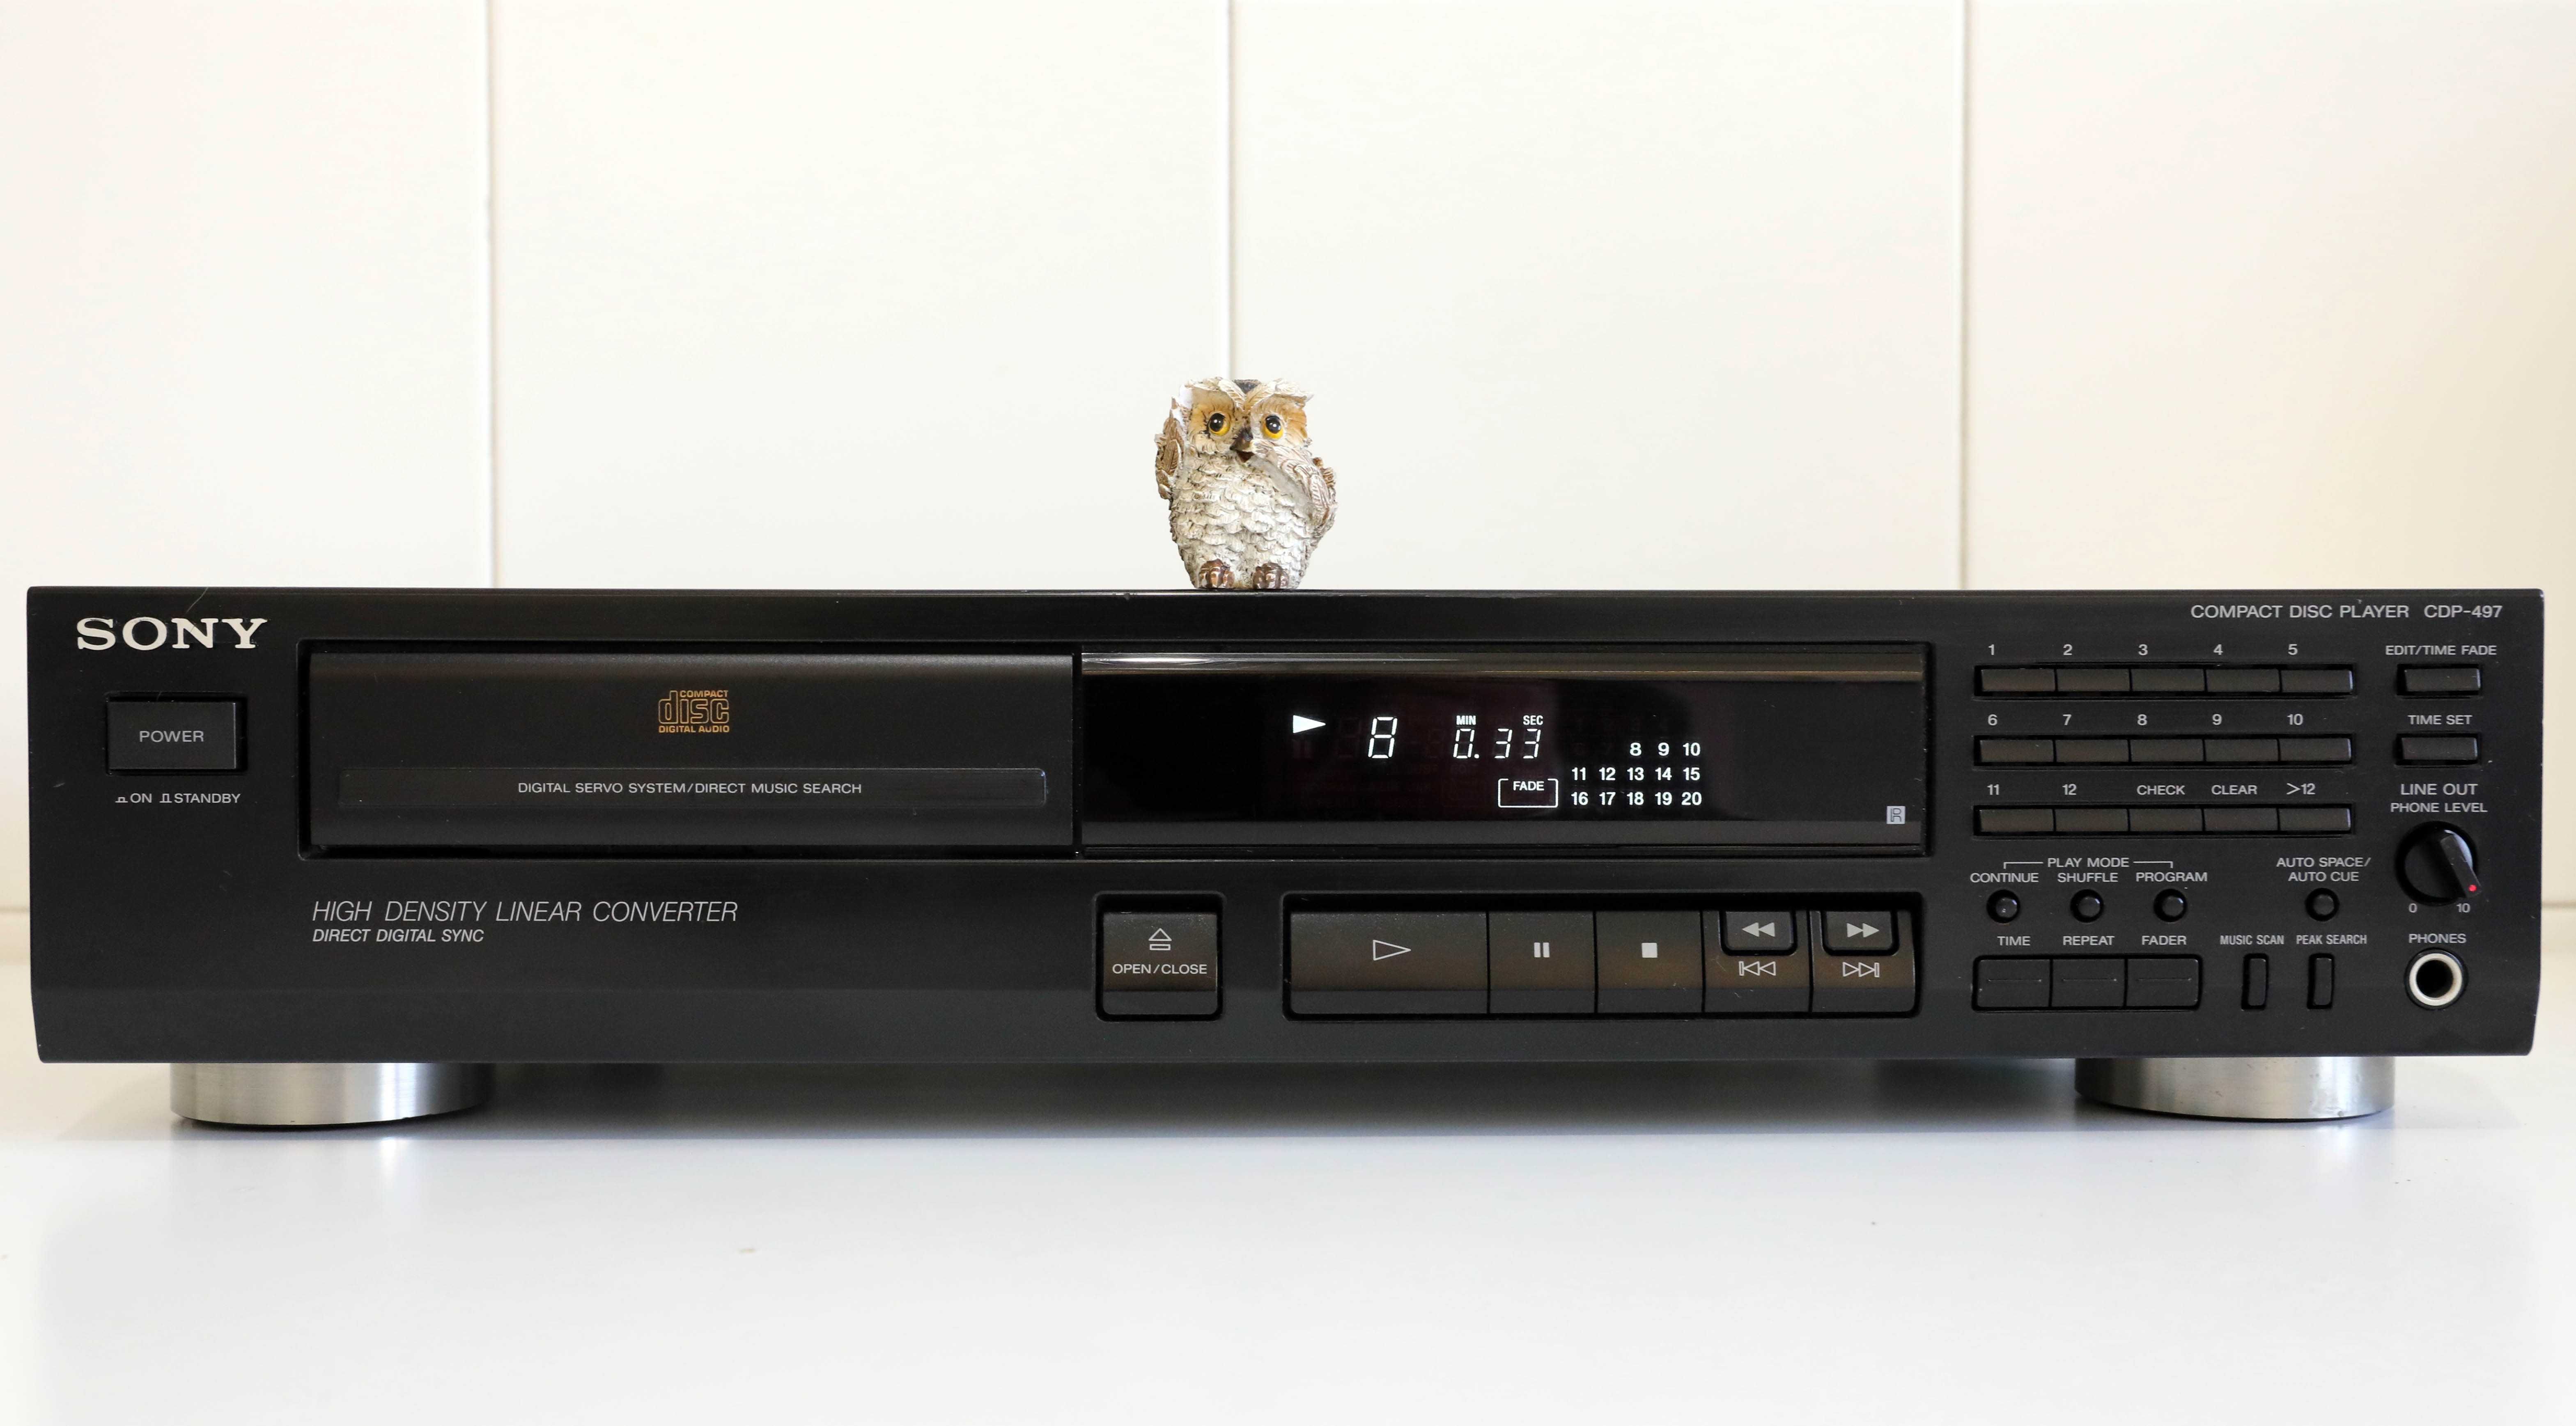 Sony CDP-497 Compact Disc Player